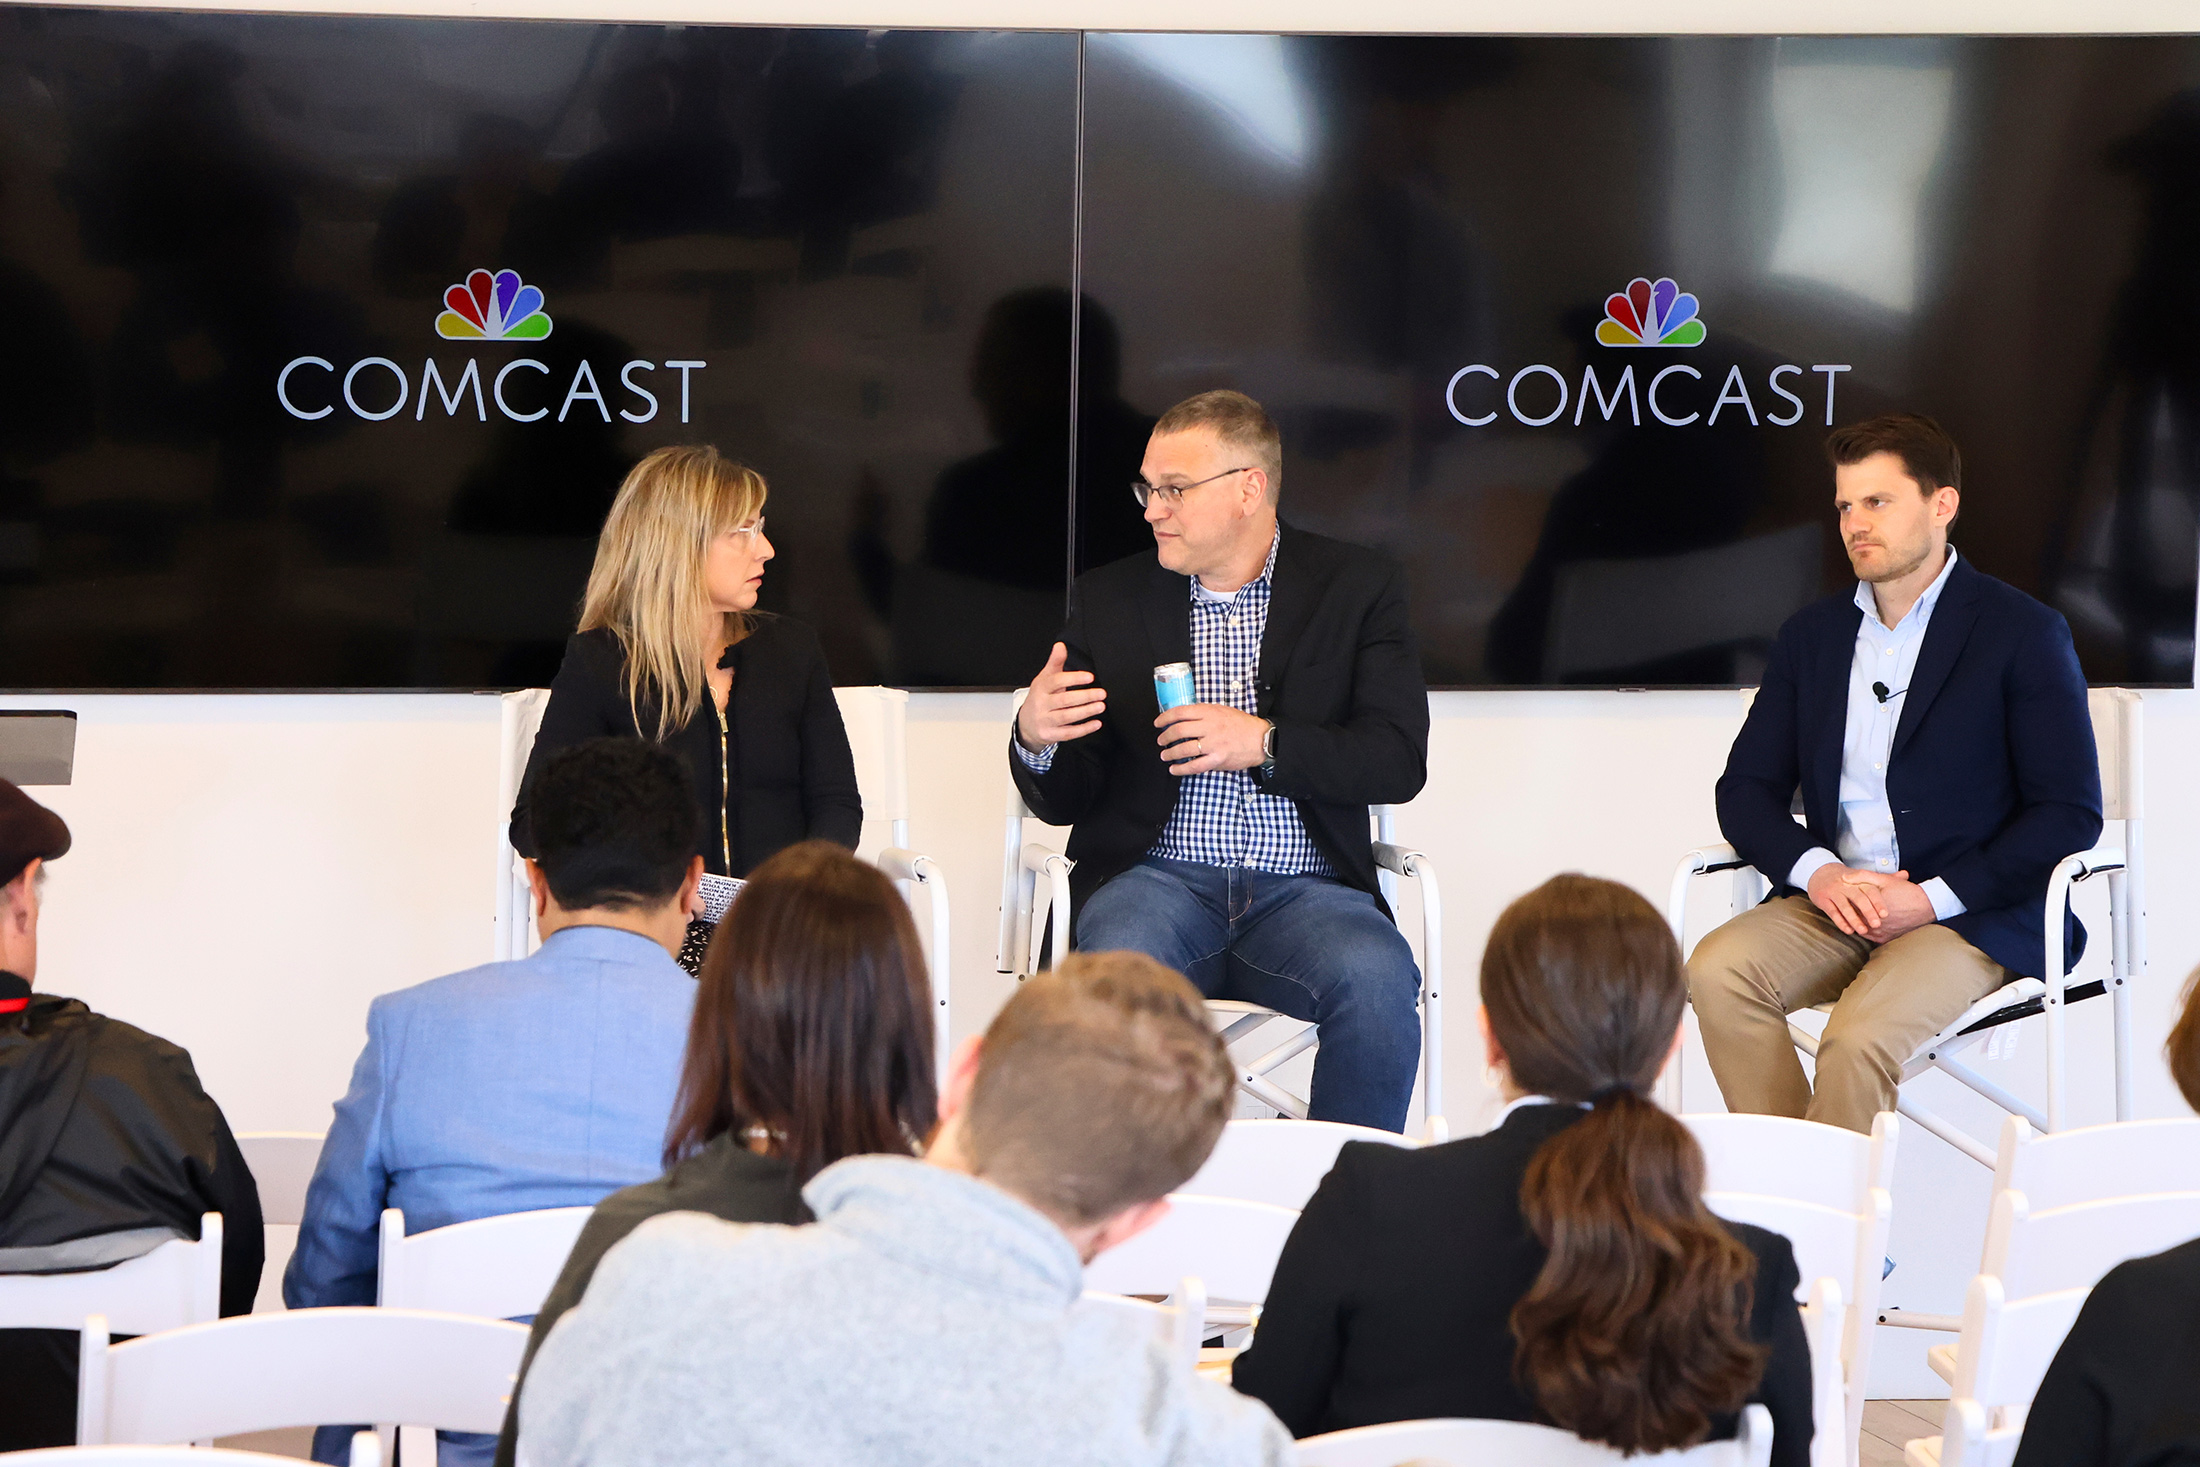 The Standard's editor-in-chief Julie Makinen moderates a panel discussion with Elad Nafshi, chief network officer for Comcast, and Jeff Bellisario, executive director for the Bay Area Council's Economic Institute